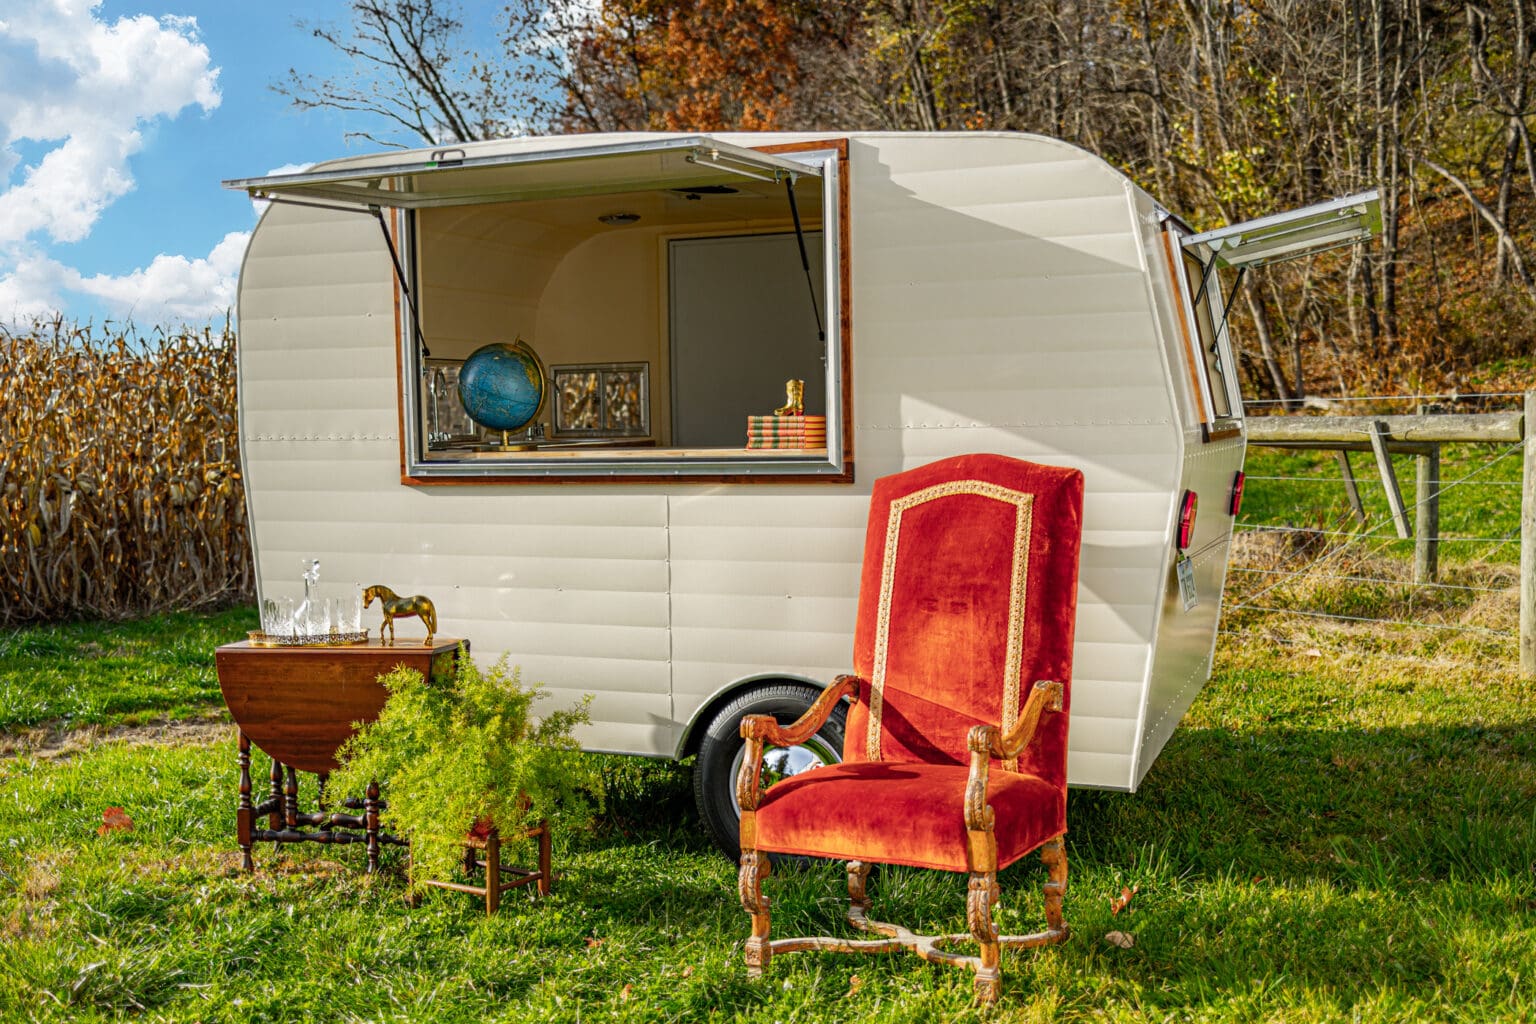 White food service trailer with vintage furniture decorating the outside